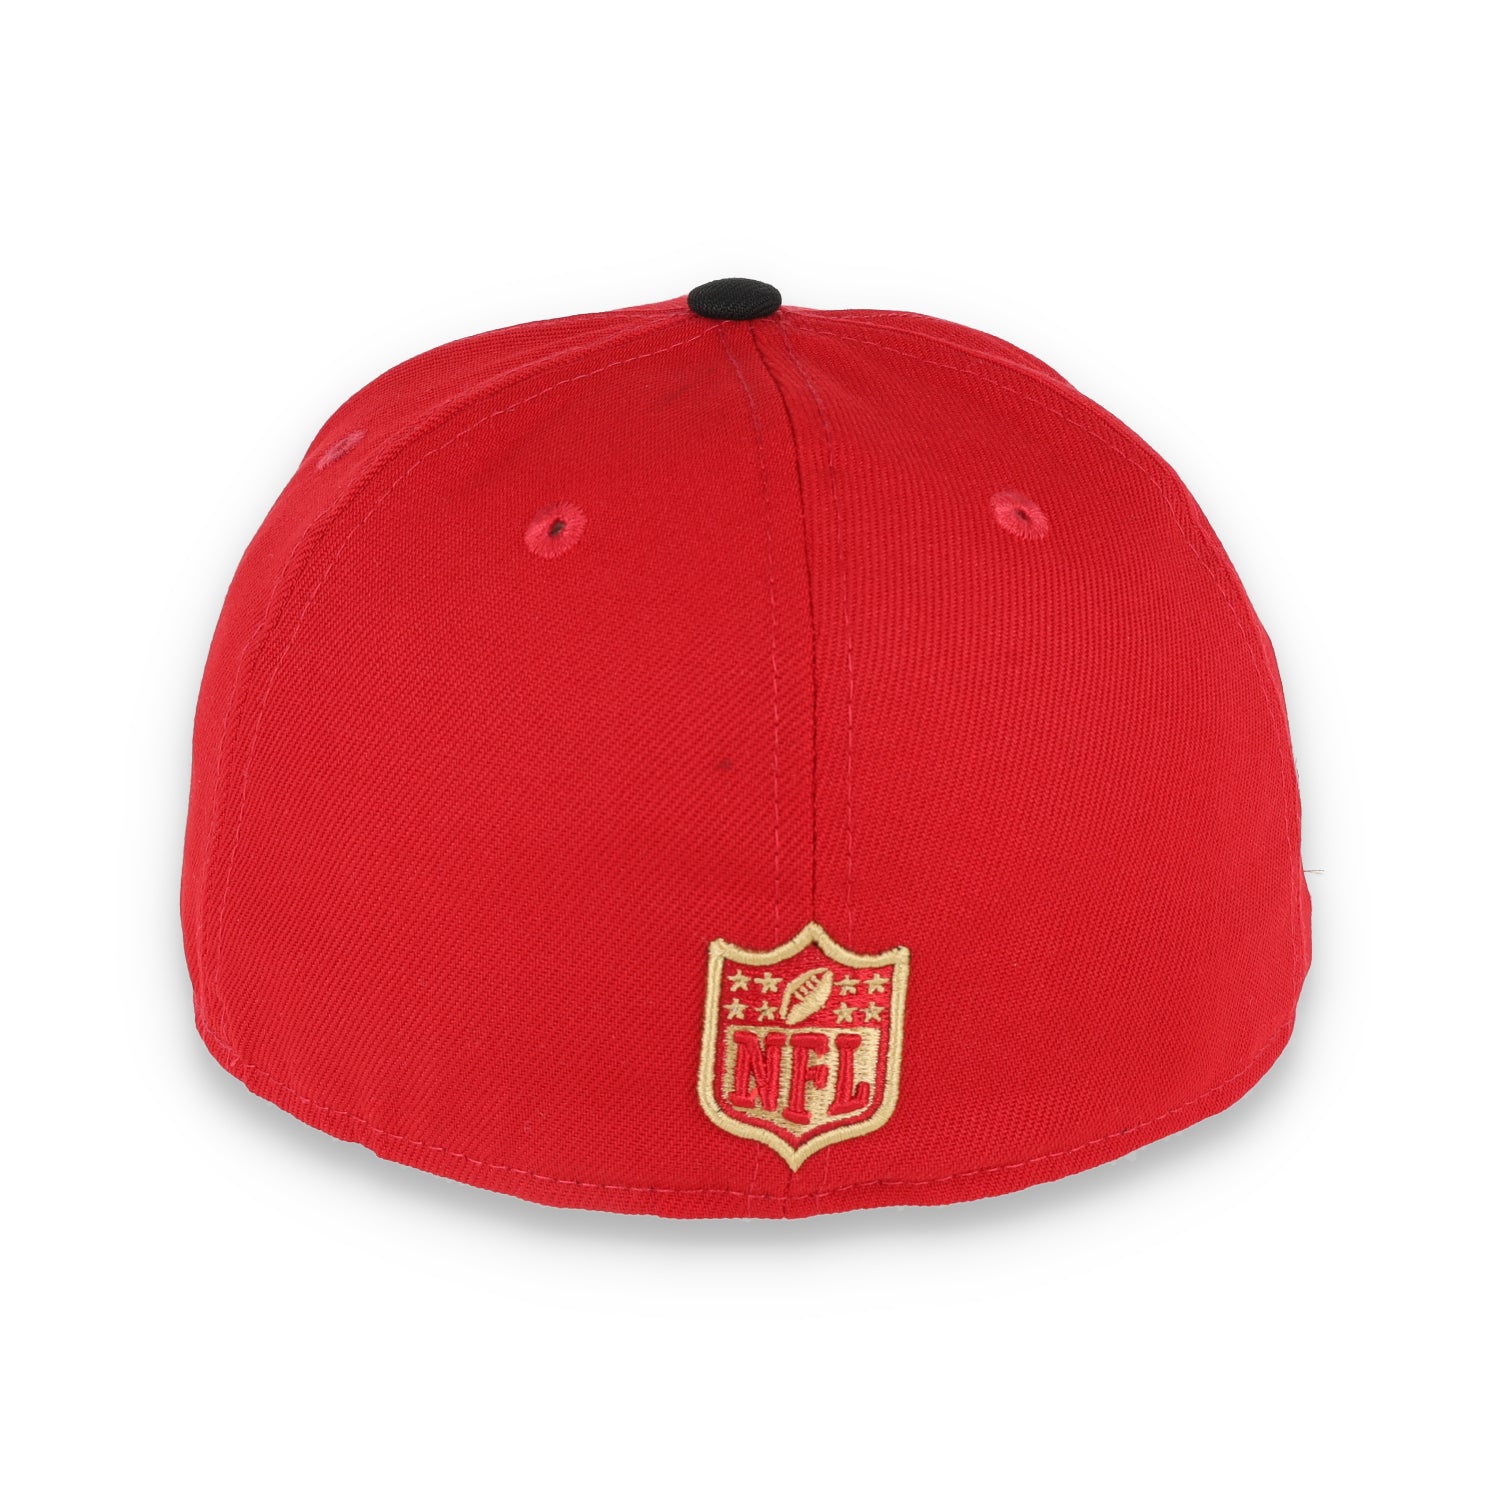 New Era San Francisco 49ERS NFC West 59FIFTY Fitted Hat - Red/Black